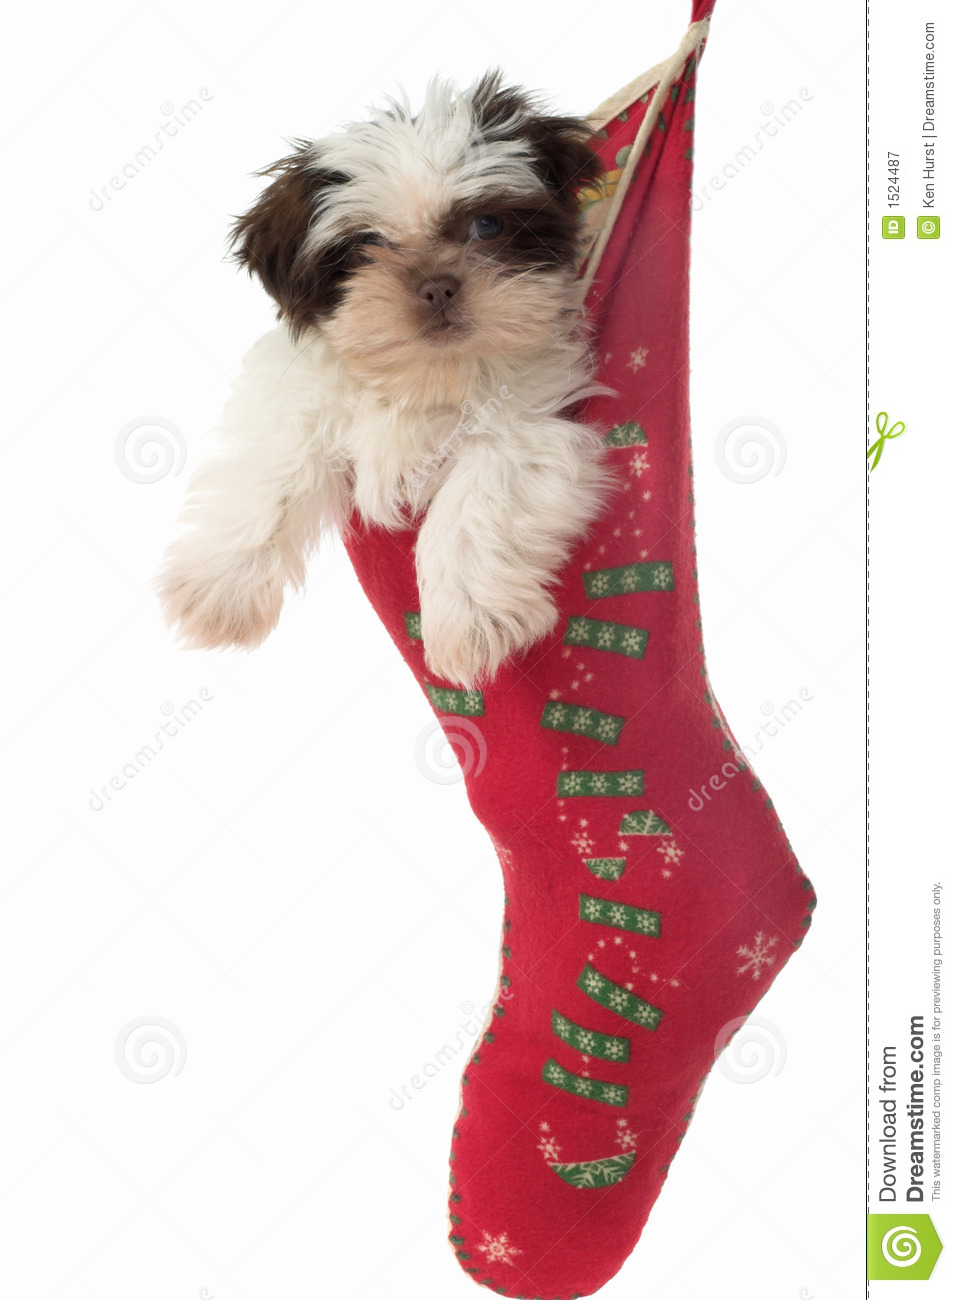 Puppy Hanging Around In Christmas Stocking 2 Royalty Free Stock